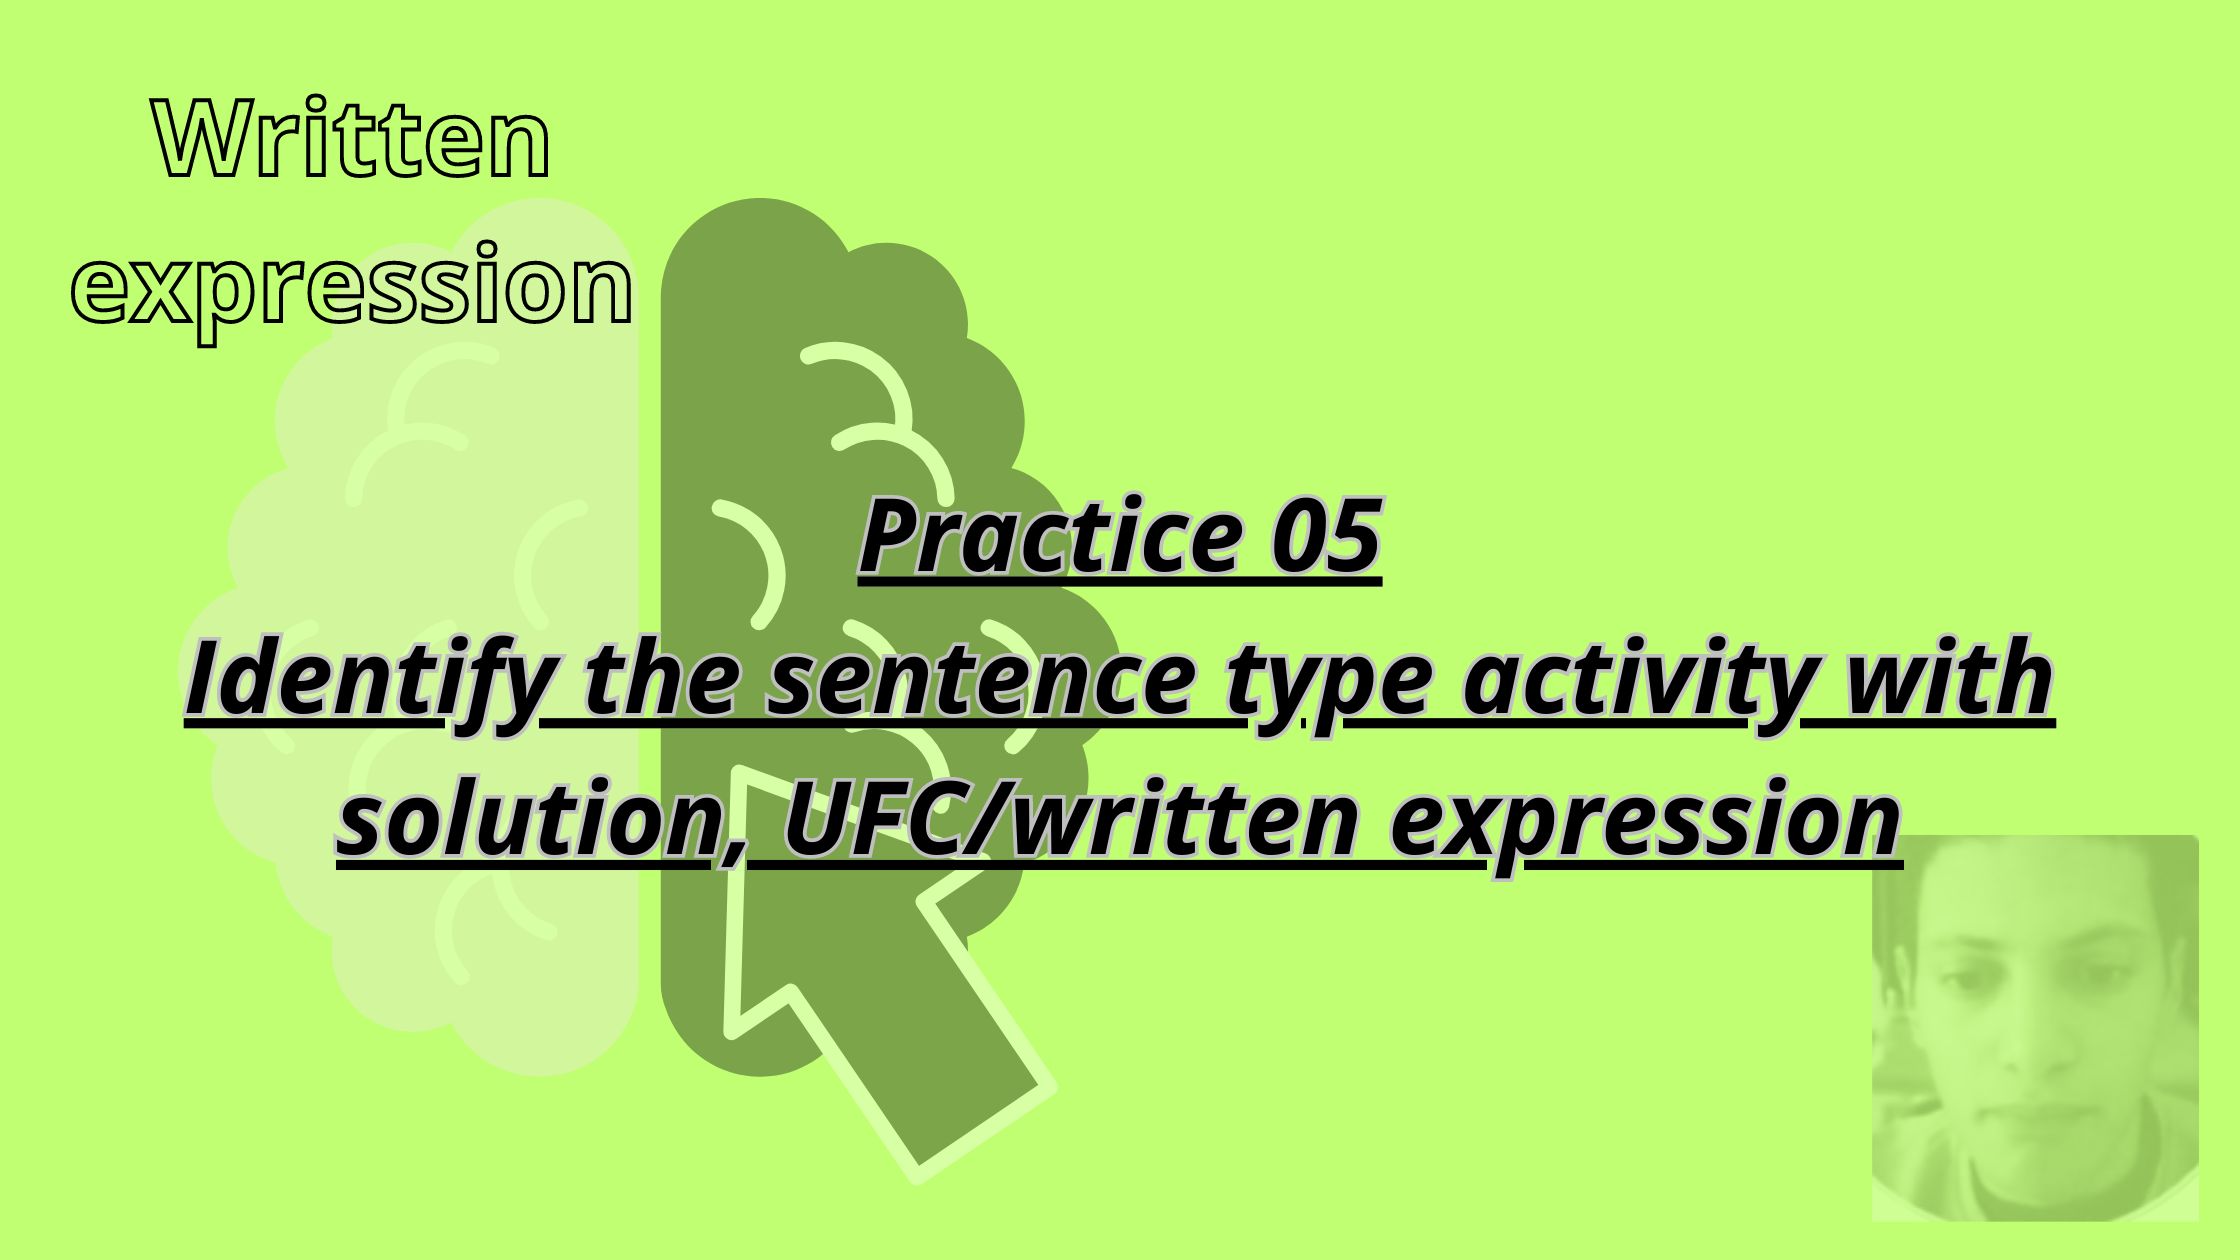 Identify the sentence type activity with solution, UFC/written expression